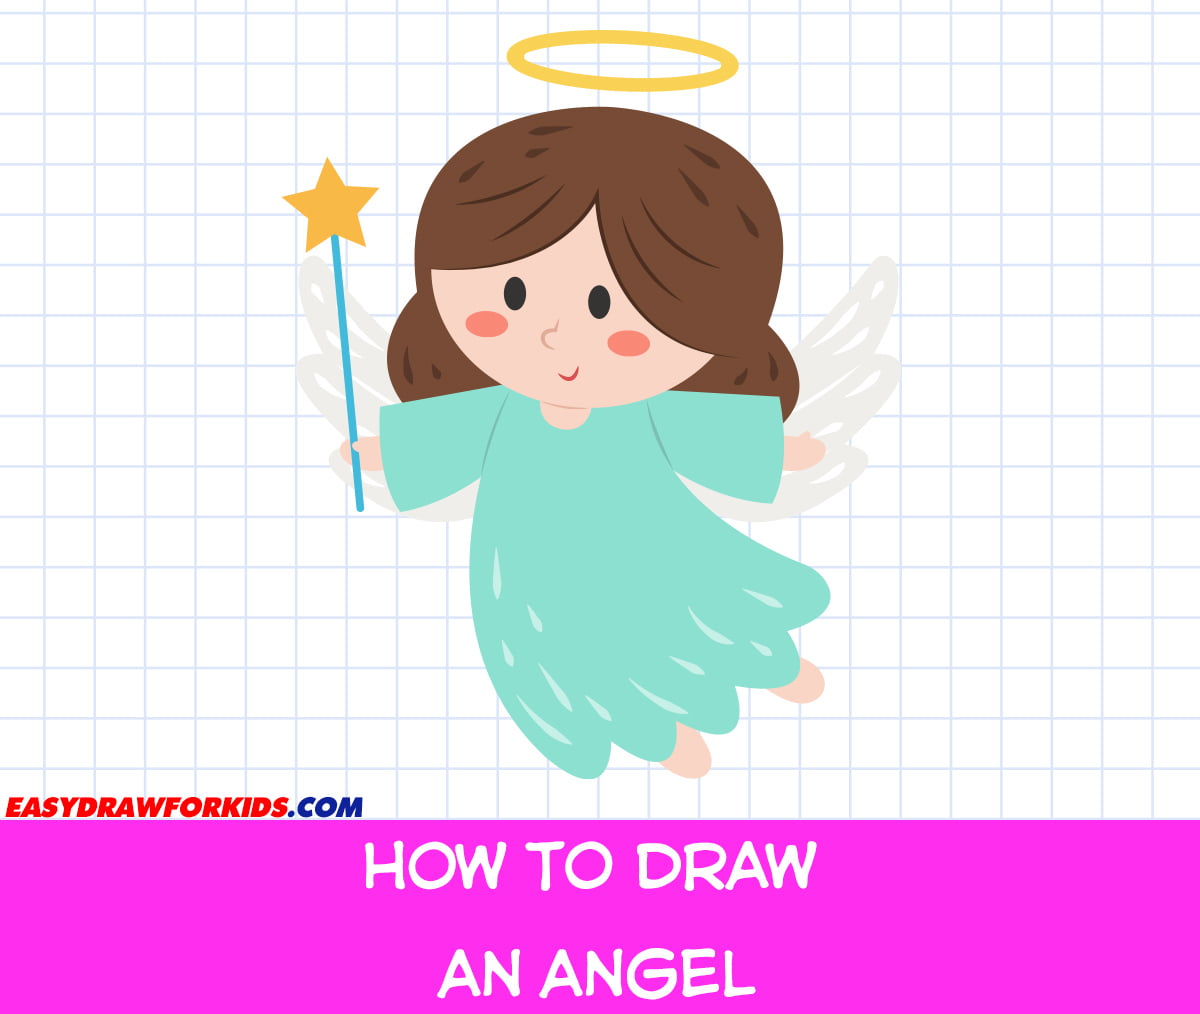 How to Draw a Cute Devil by Easydrawforkids - Make better art